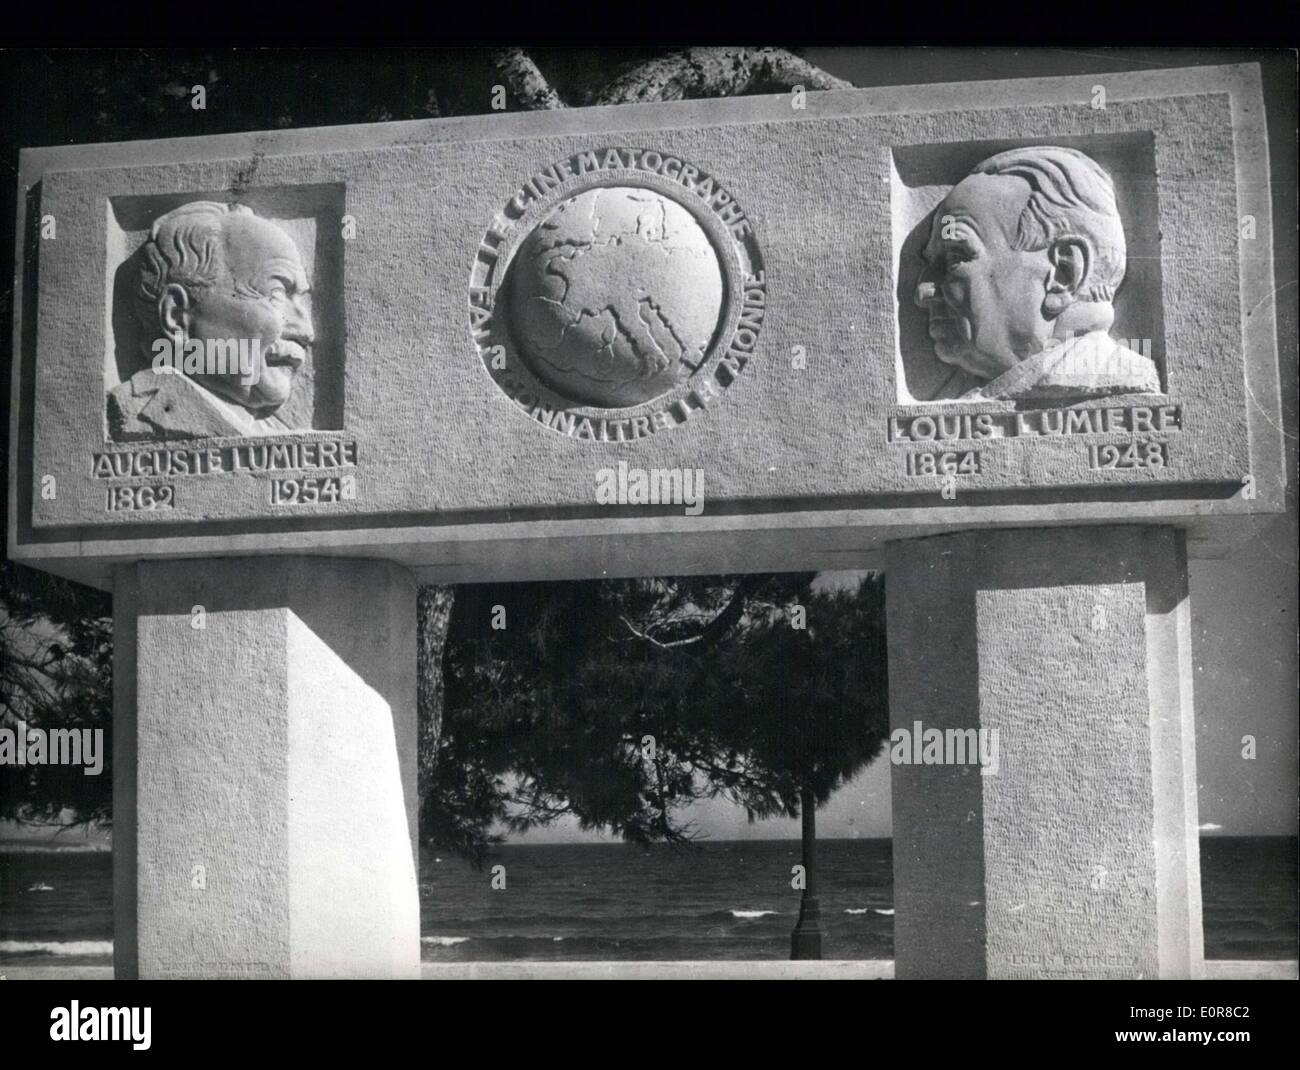 Aug. 04, 1958 - Monument to Brothers Auguste and Louis Lumiere Stock Photo